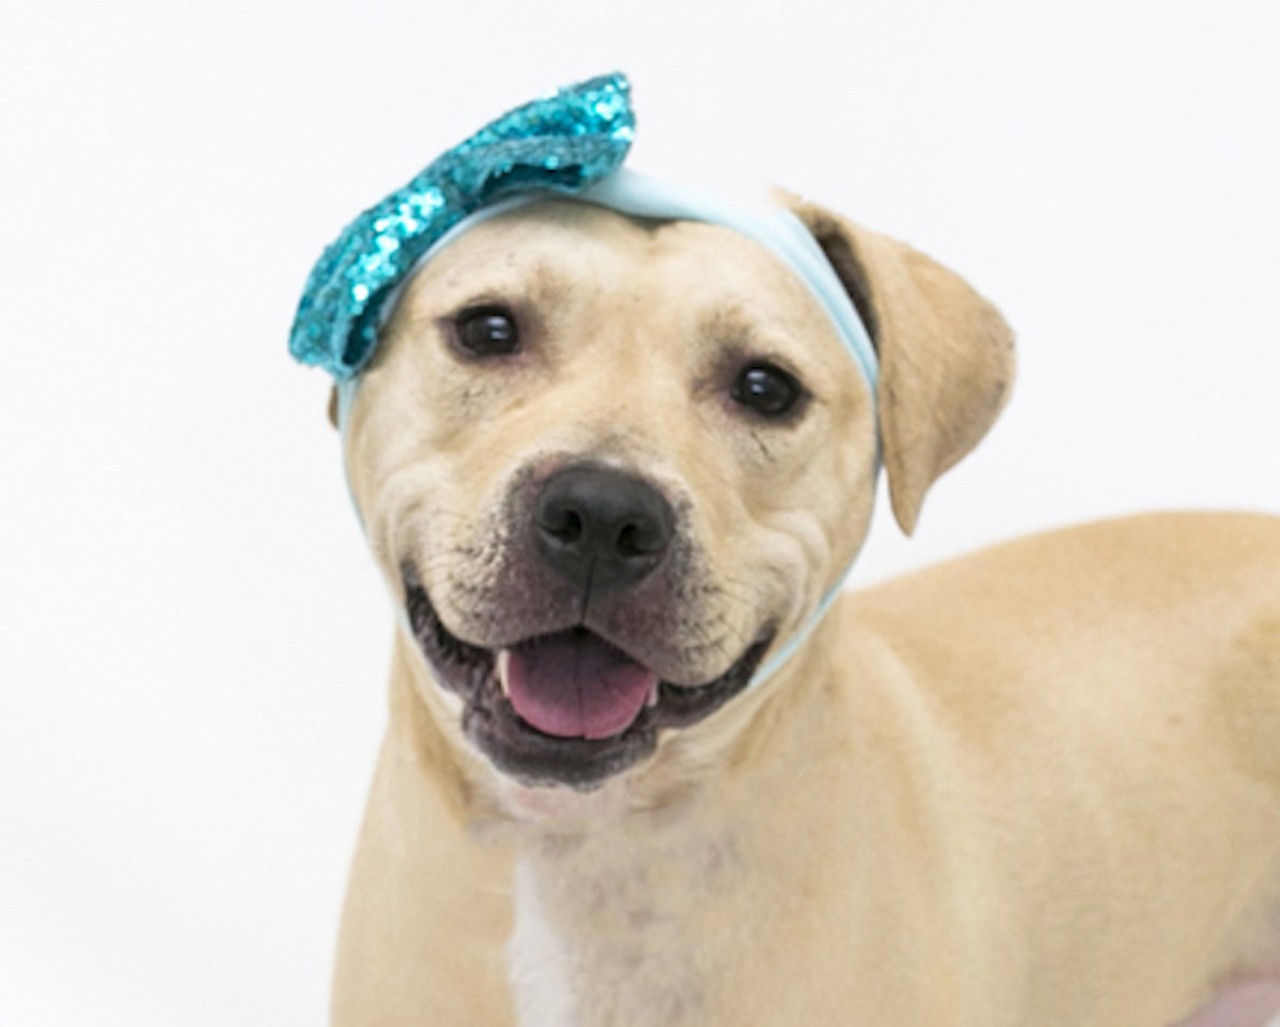 19 adoptable dogs available right now at Orange County Animal Services